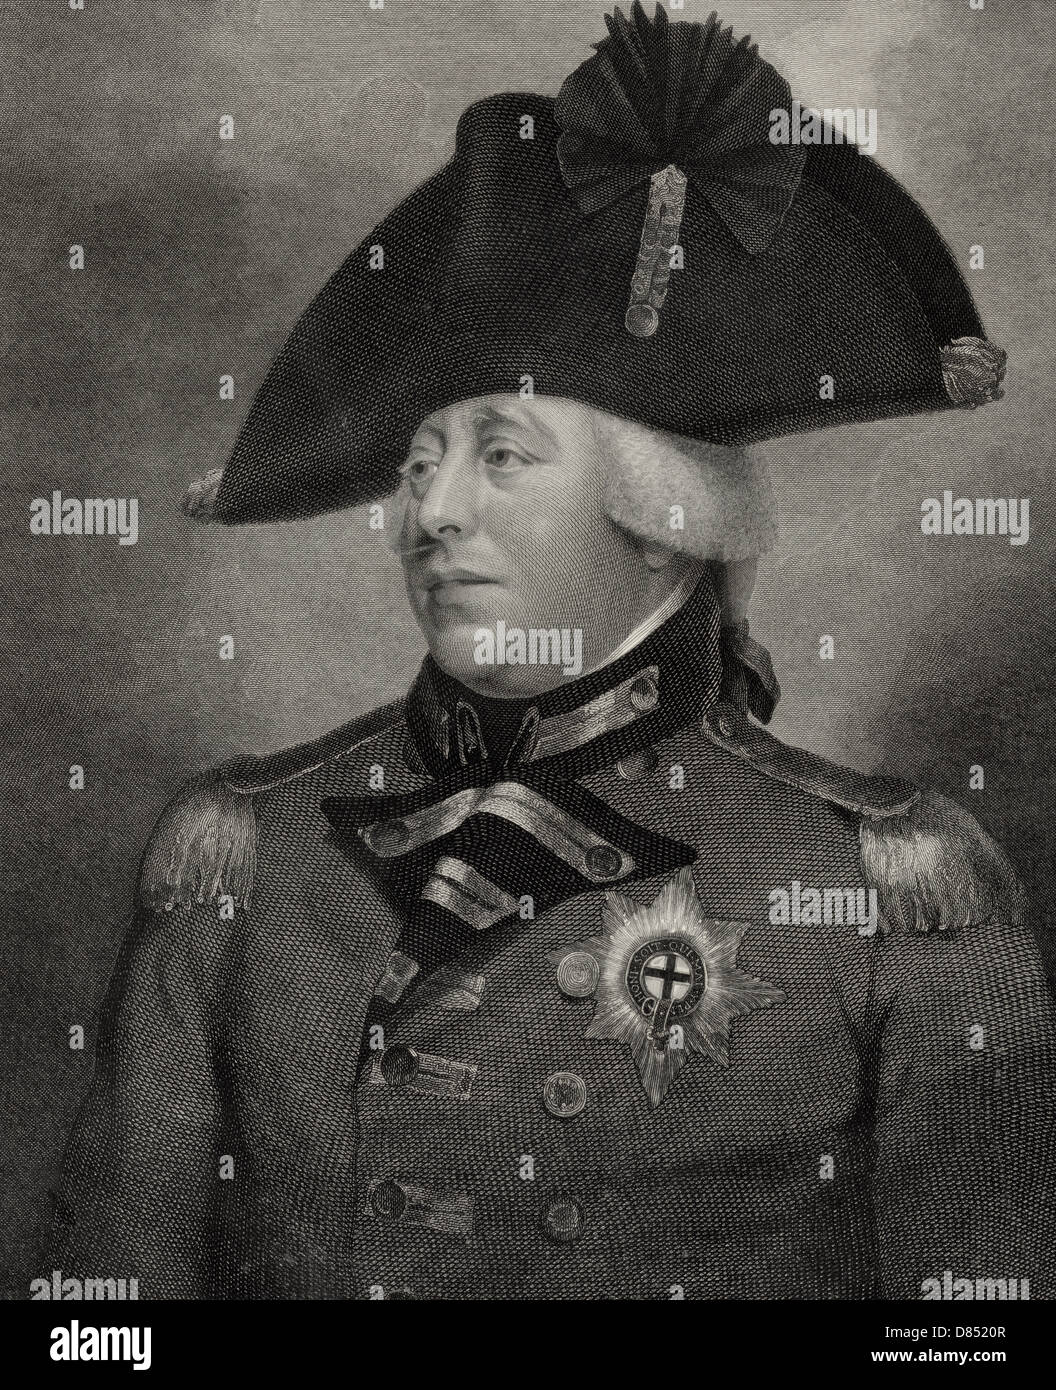 His most excellent majesty George the third, by the grace of god, of the United Kingdom of Great Britain & Ireland, king, defender of the faith. George III, King of Great Britain, head-and-shoulders portrait, facing slightly left, wearing military hat and coat. Stock Photo